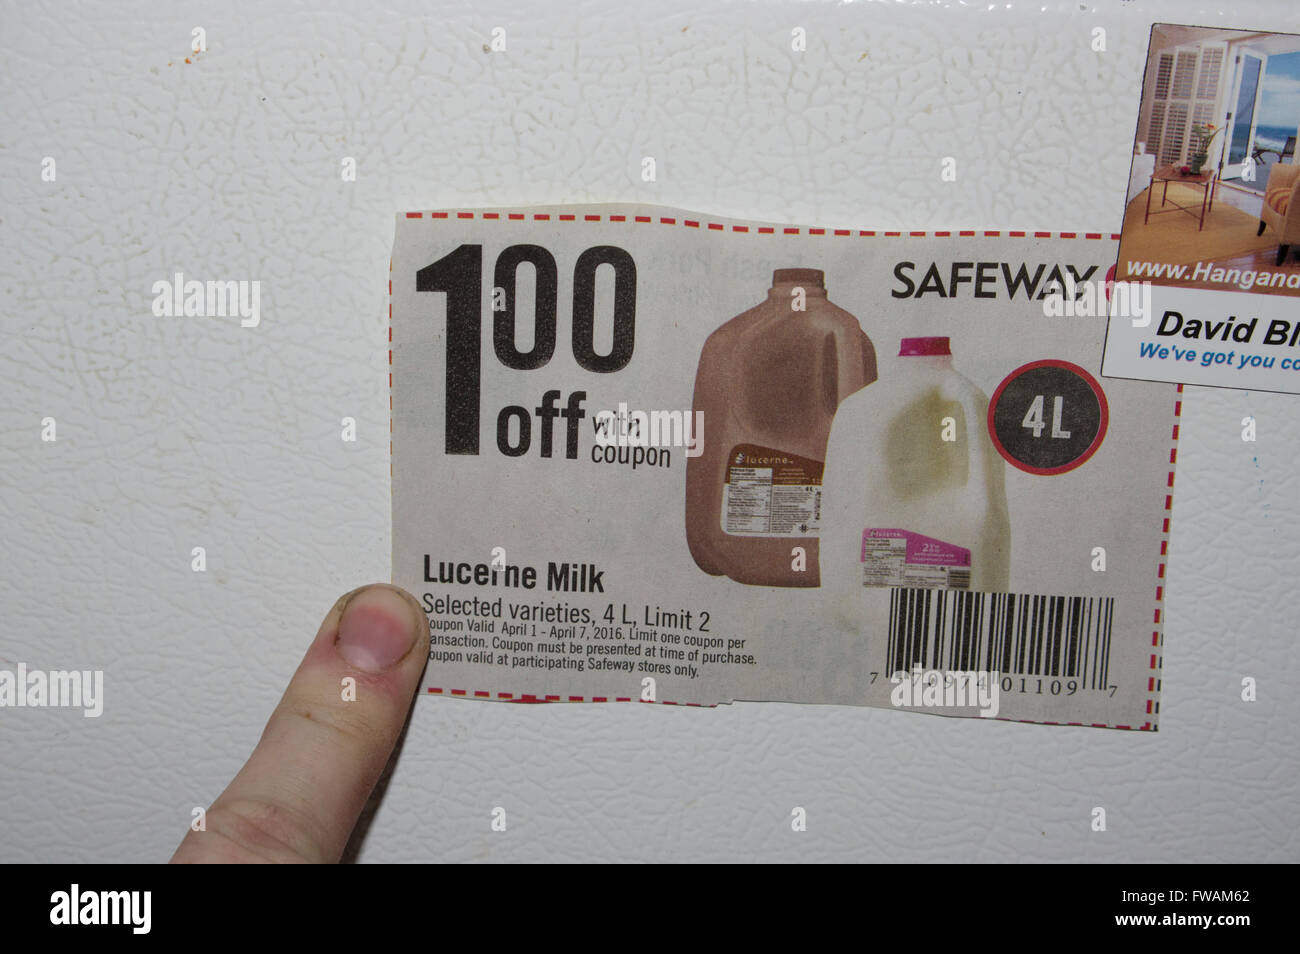 coupon, safeway, grocery store Stock Photo